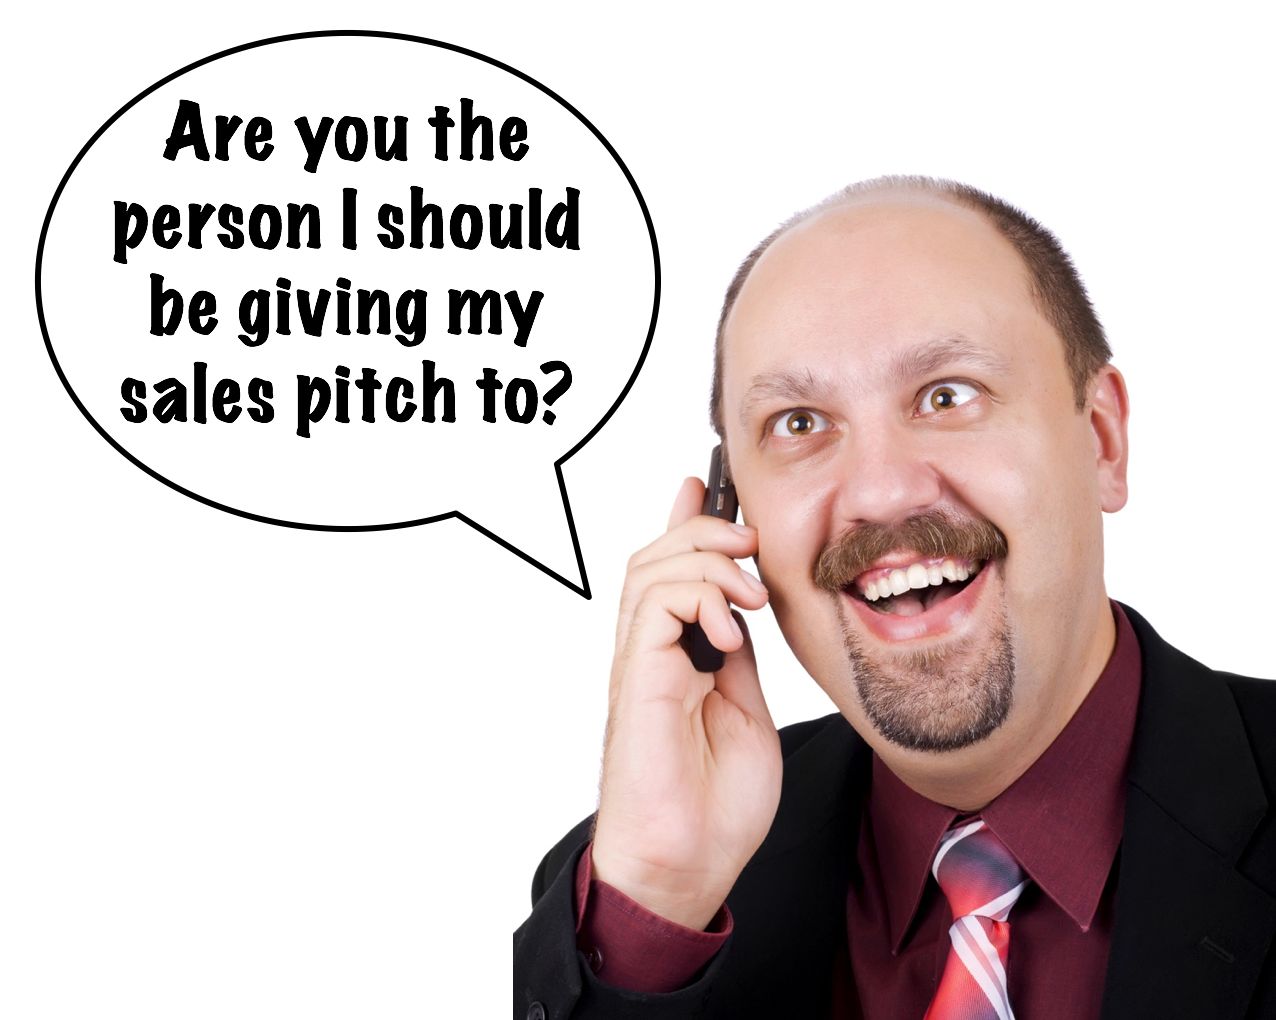 Avoid This Early Question that Screams “Salesperson!”